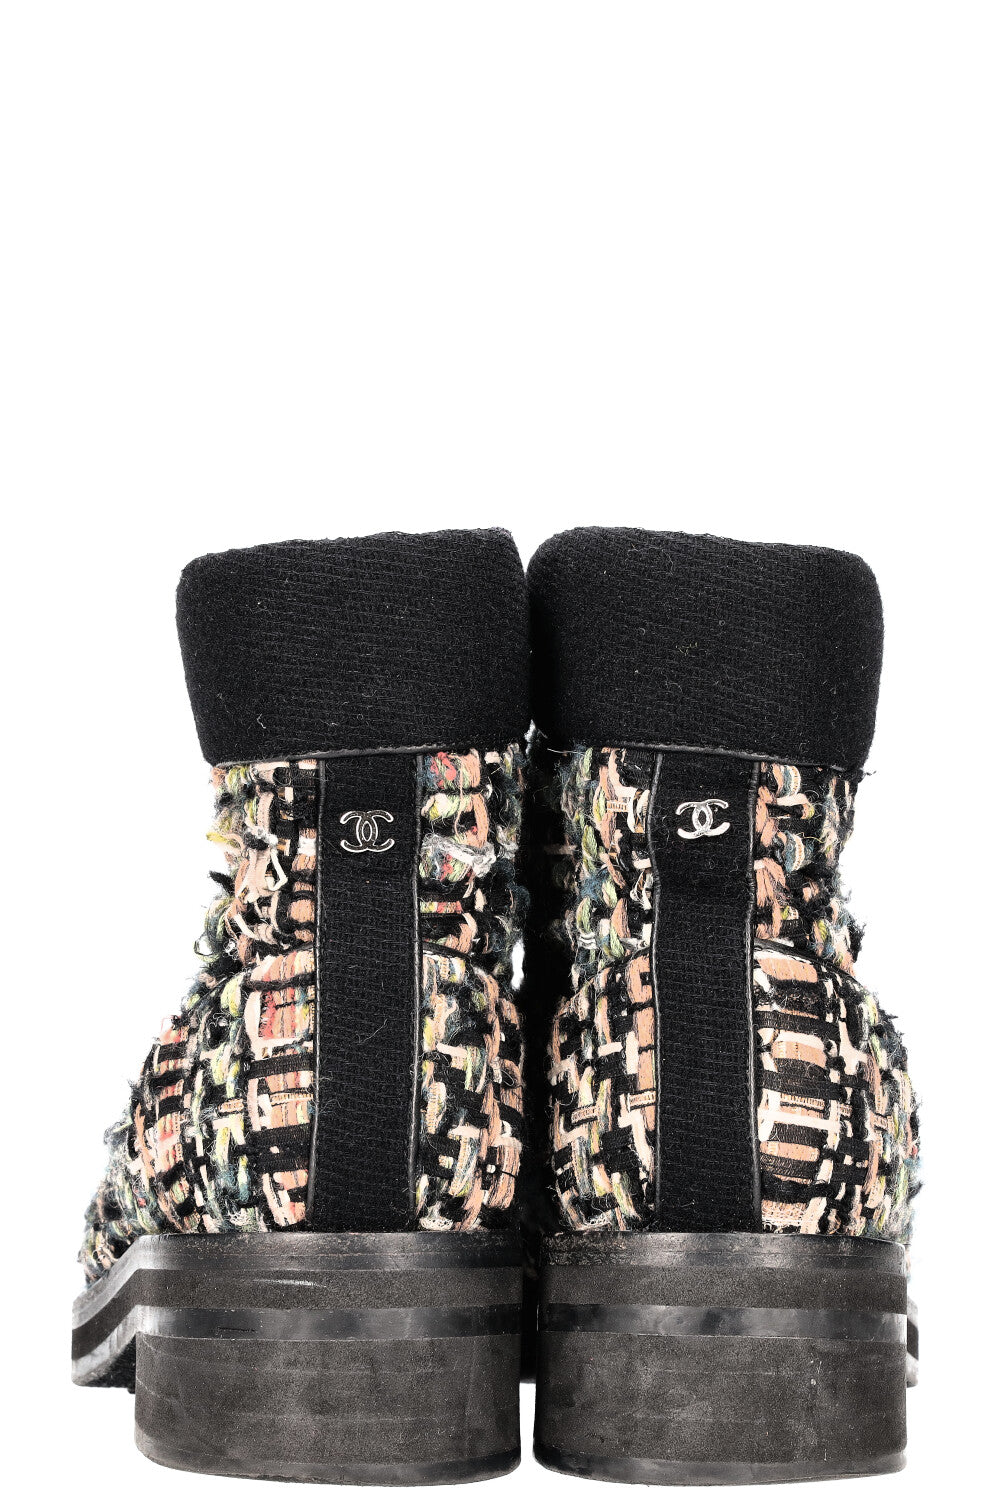 CHANEL Tweed Hiking Boots Multicolor